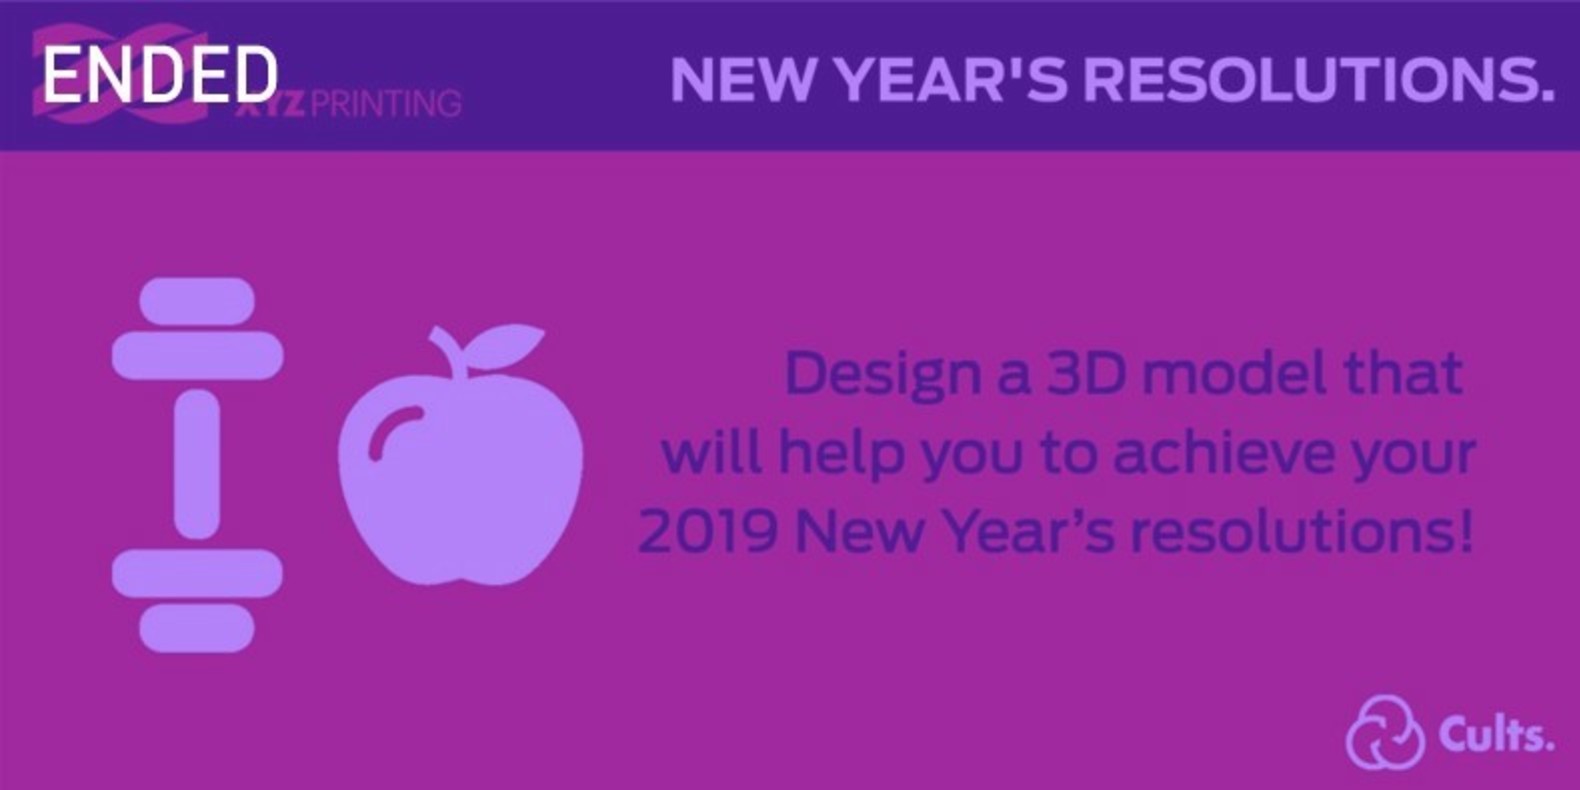 The challenge of design and 3D printing about New Year's Resolutions.